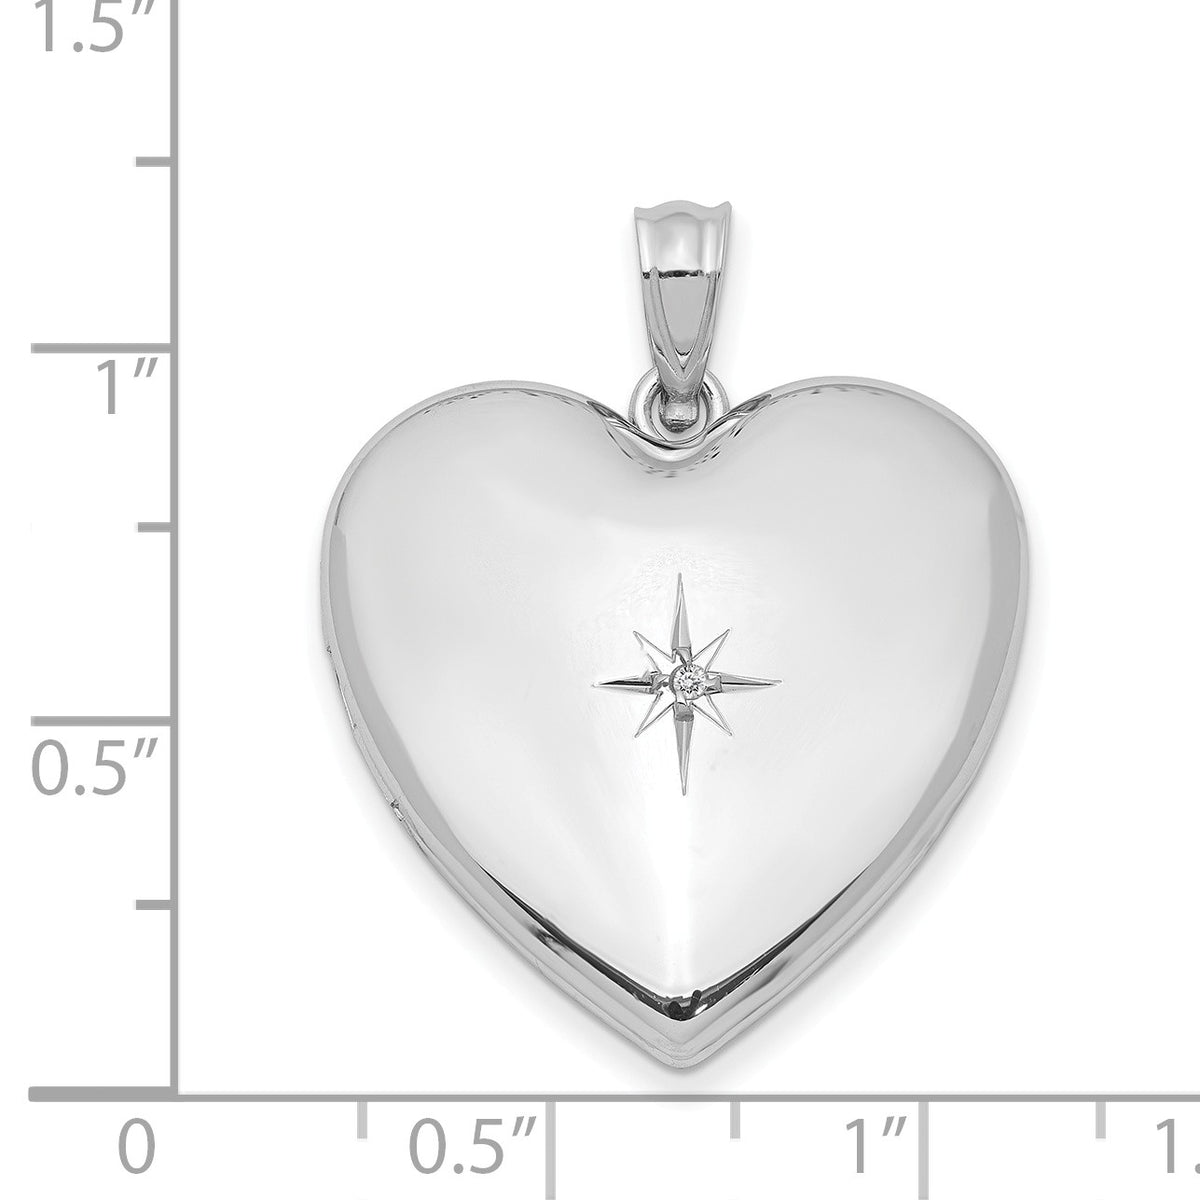 Alternate view of the 24mm .01 Ct Diamond Star Design Heart Shaped Locket in Sterling Silver by The Black Bow Jewelry Co.